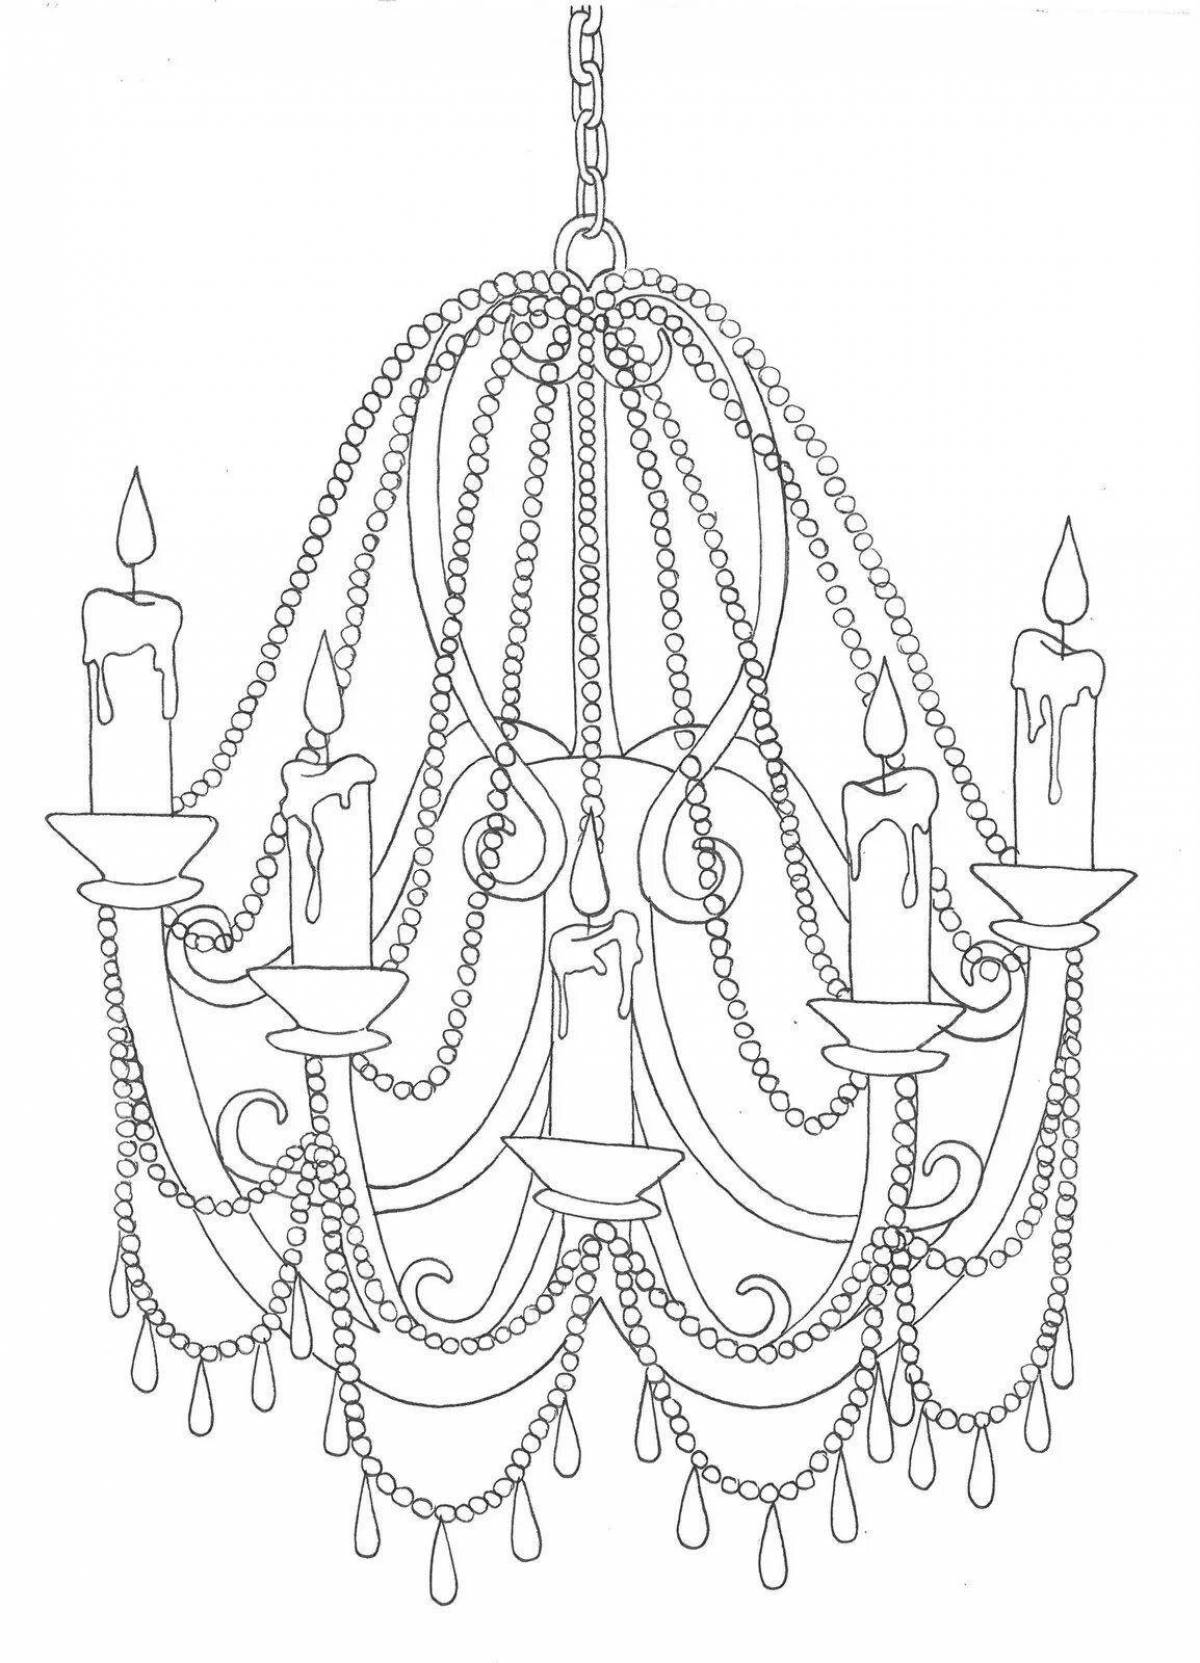 Radiant coloring page chandelier for children